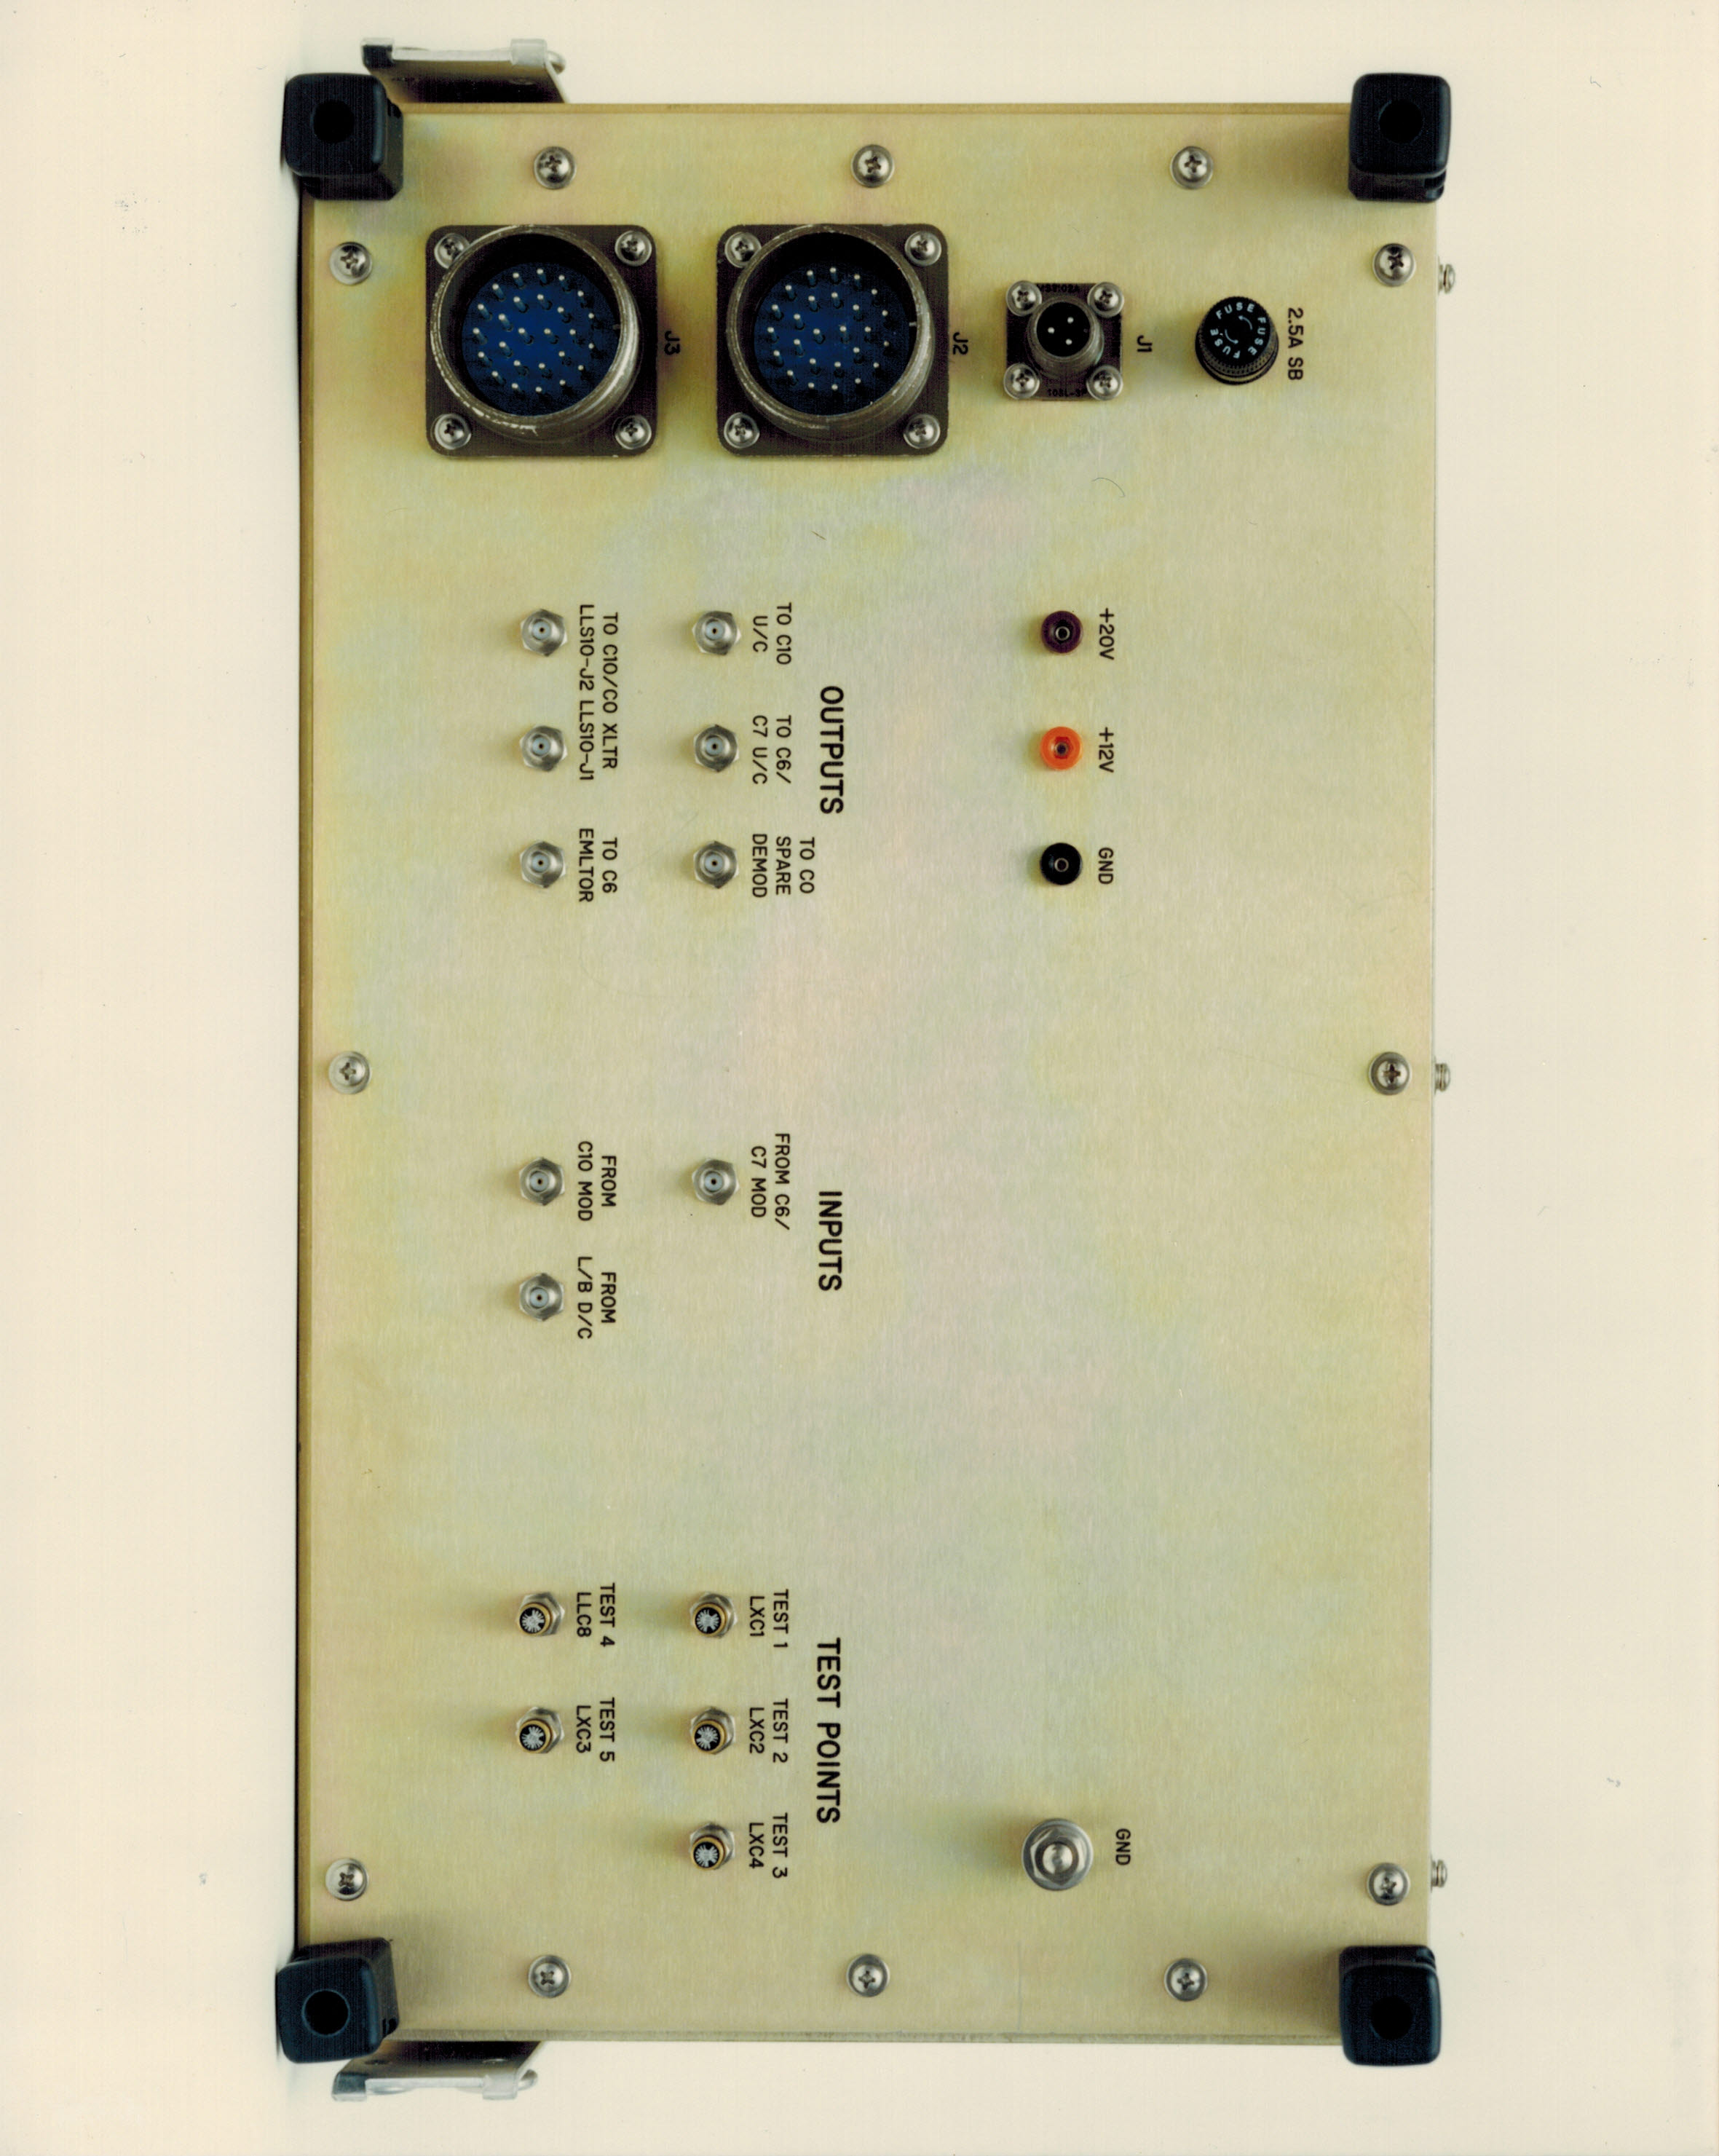 LBR_Signal_Control_Chassis_Rear_View.jpg